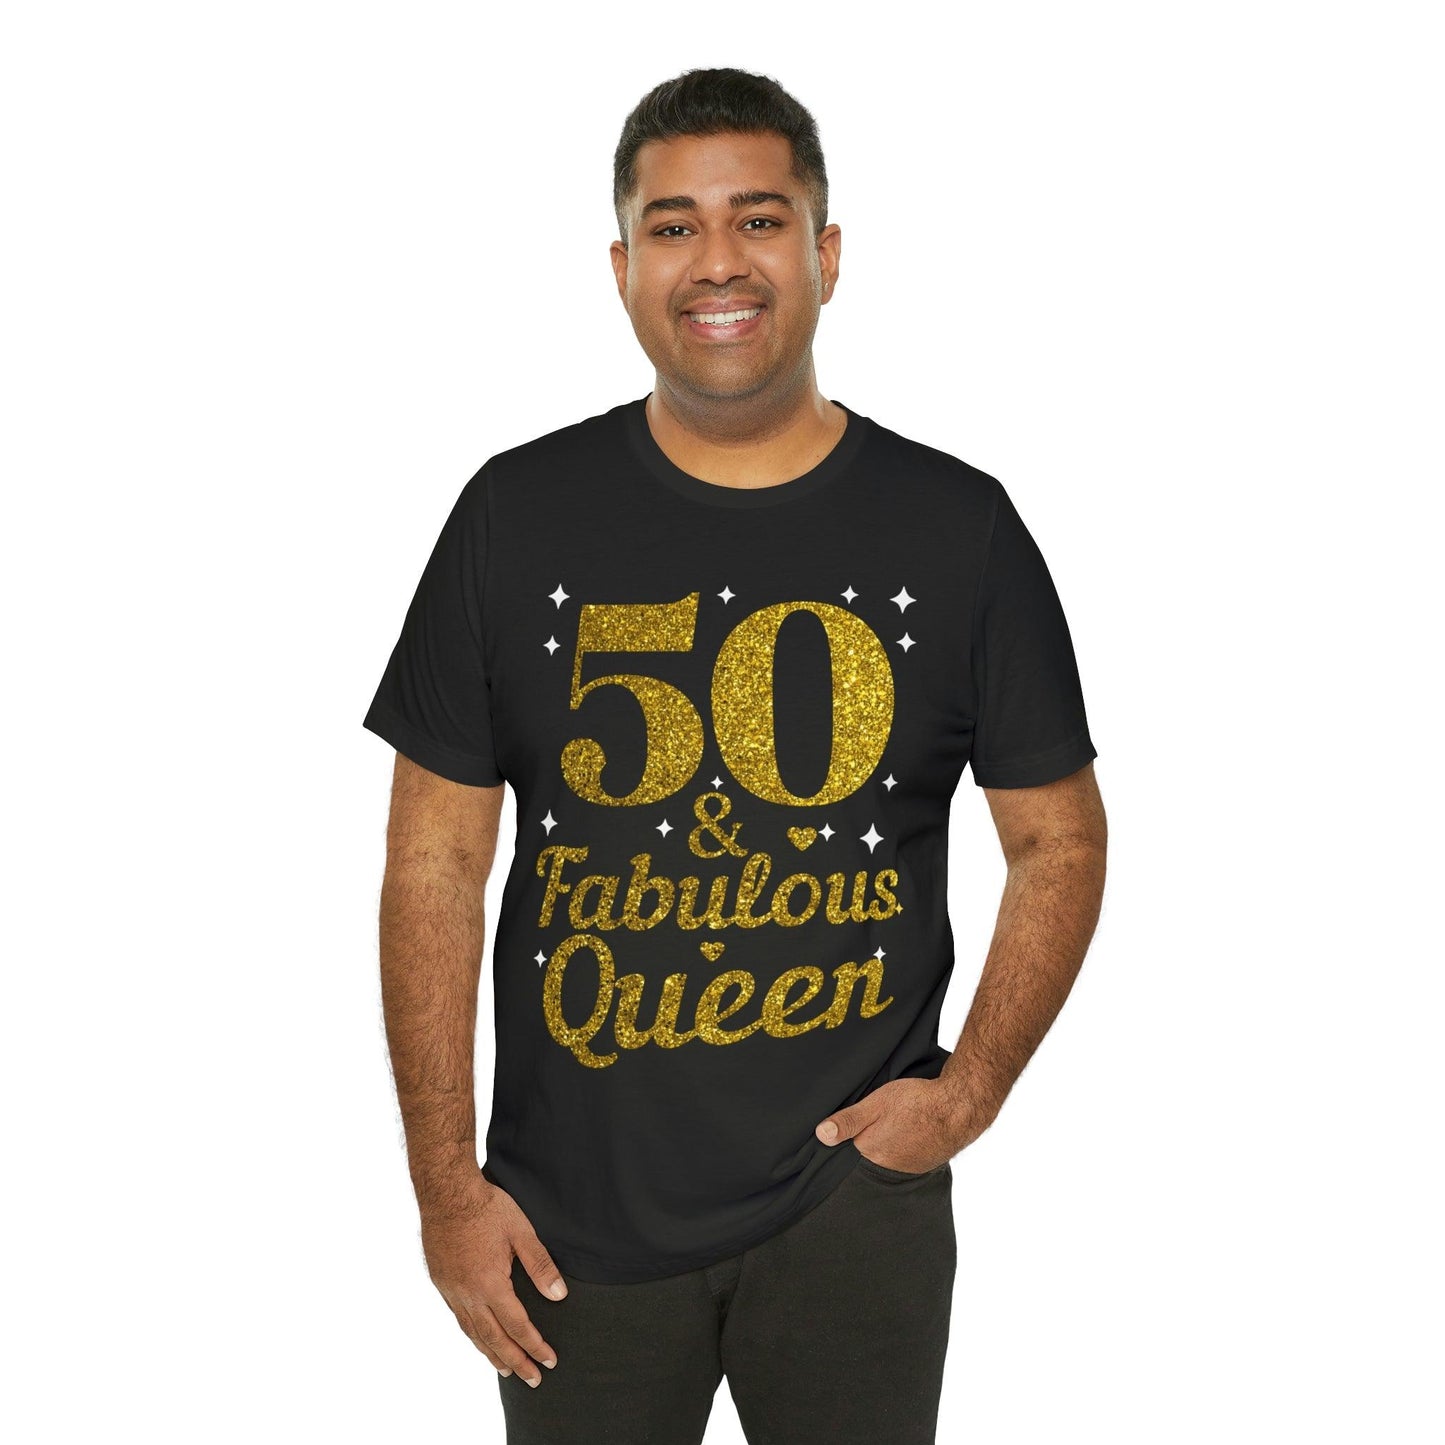 Funny 50th birthday shirt, 50th birthday Tshirt, 50 and fabulous Queen, birthday queen shirt, Gift for 50th birthday, Vintage shirt, birthday gift, birthday girl shirt, mom’s birthday gift, mom gift, wife gift, - Giftsmojo